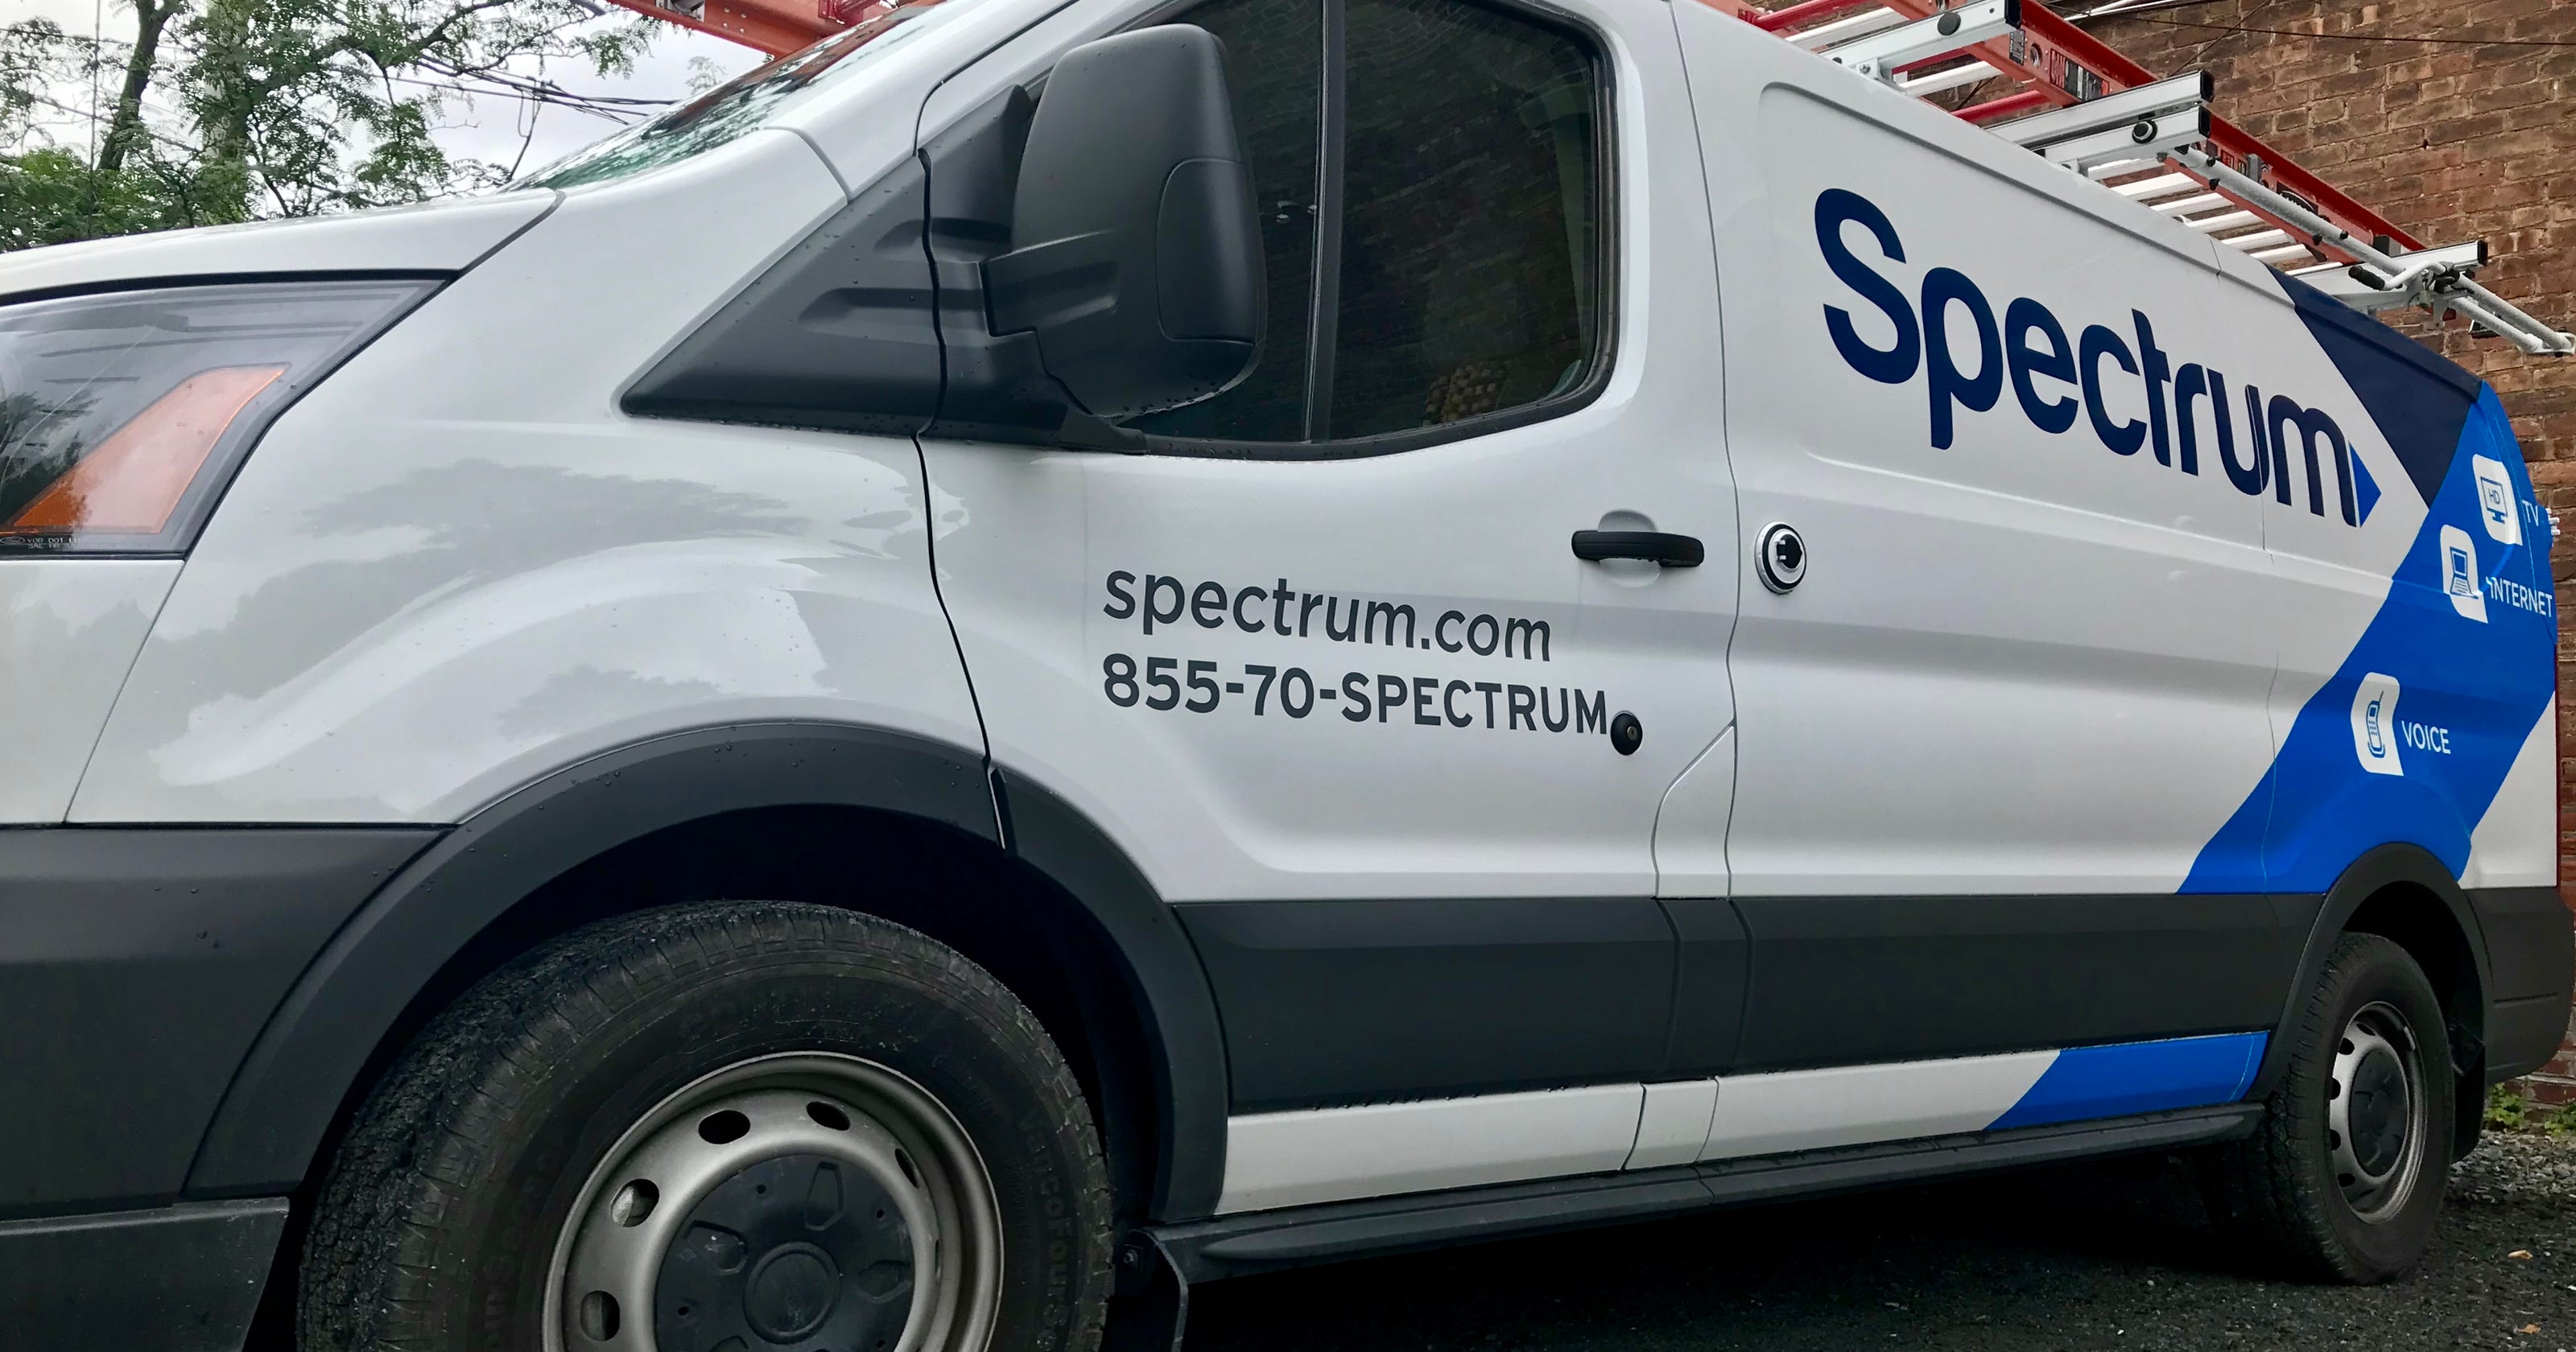 Spectrum may give refunds after recent outage